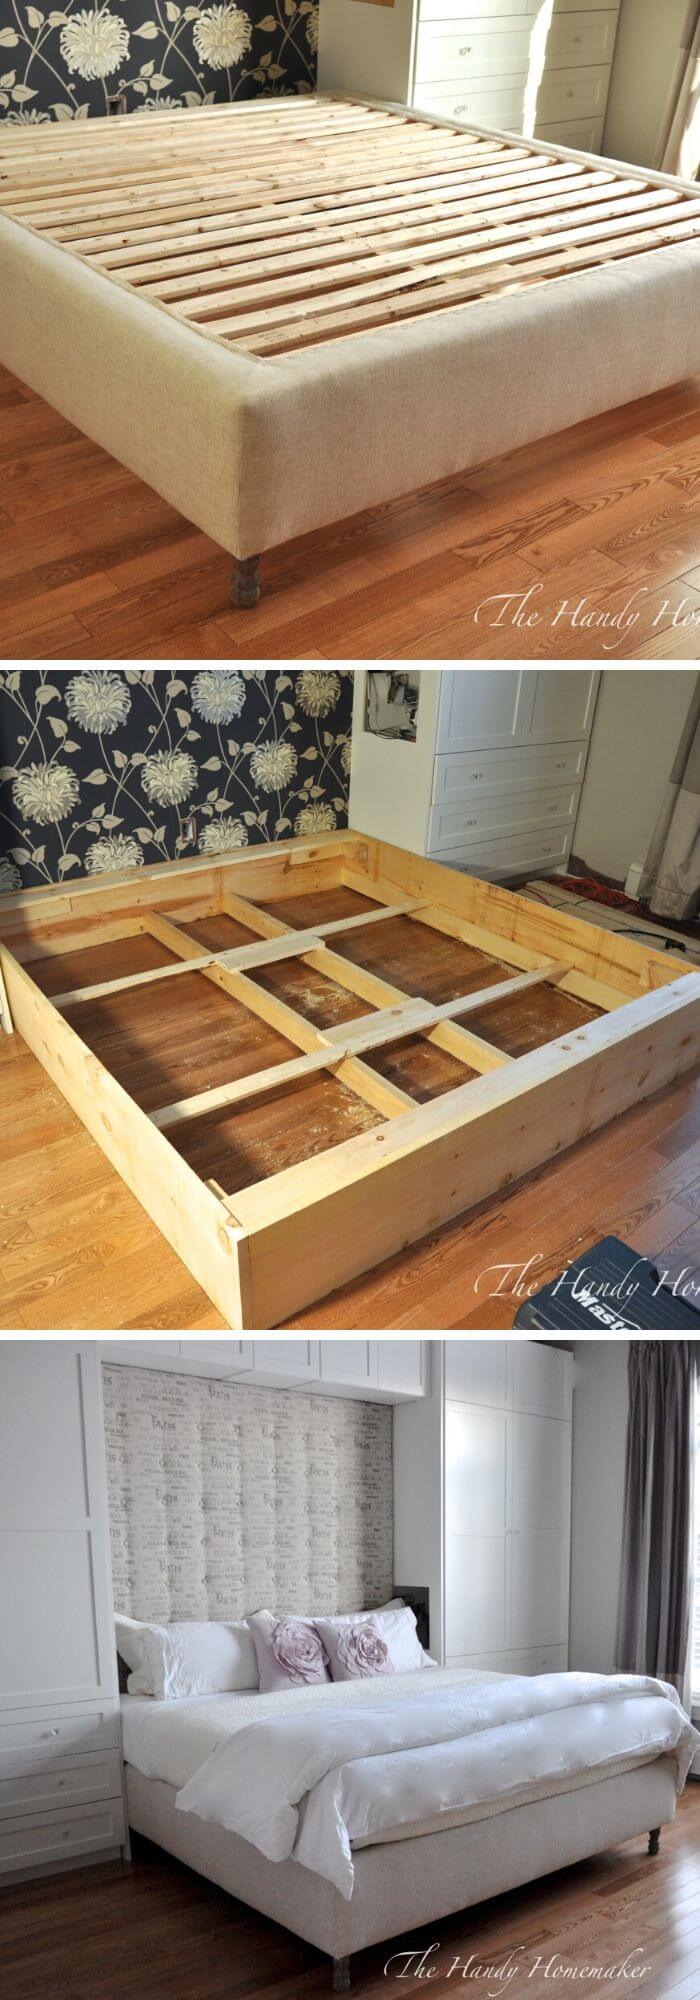 Captivant A Cuceri Bere Diy Bed Wood, How To Build A Queen Size Wood Bed Frame